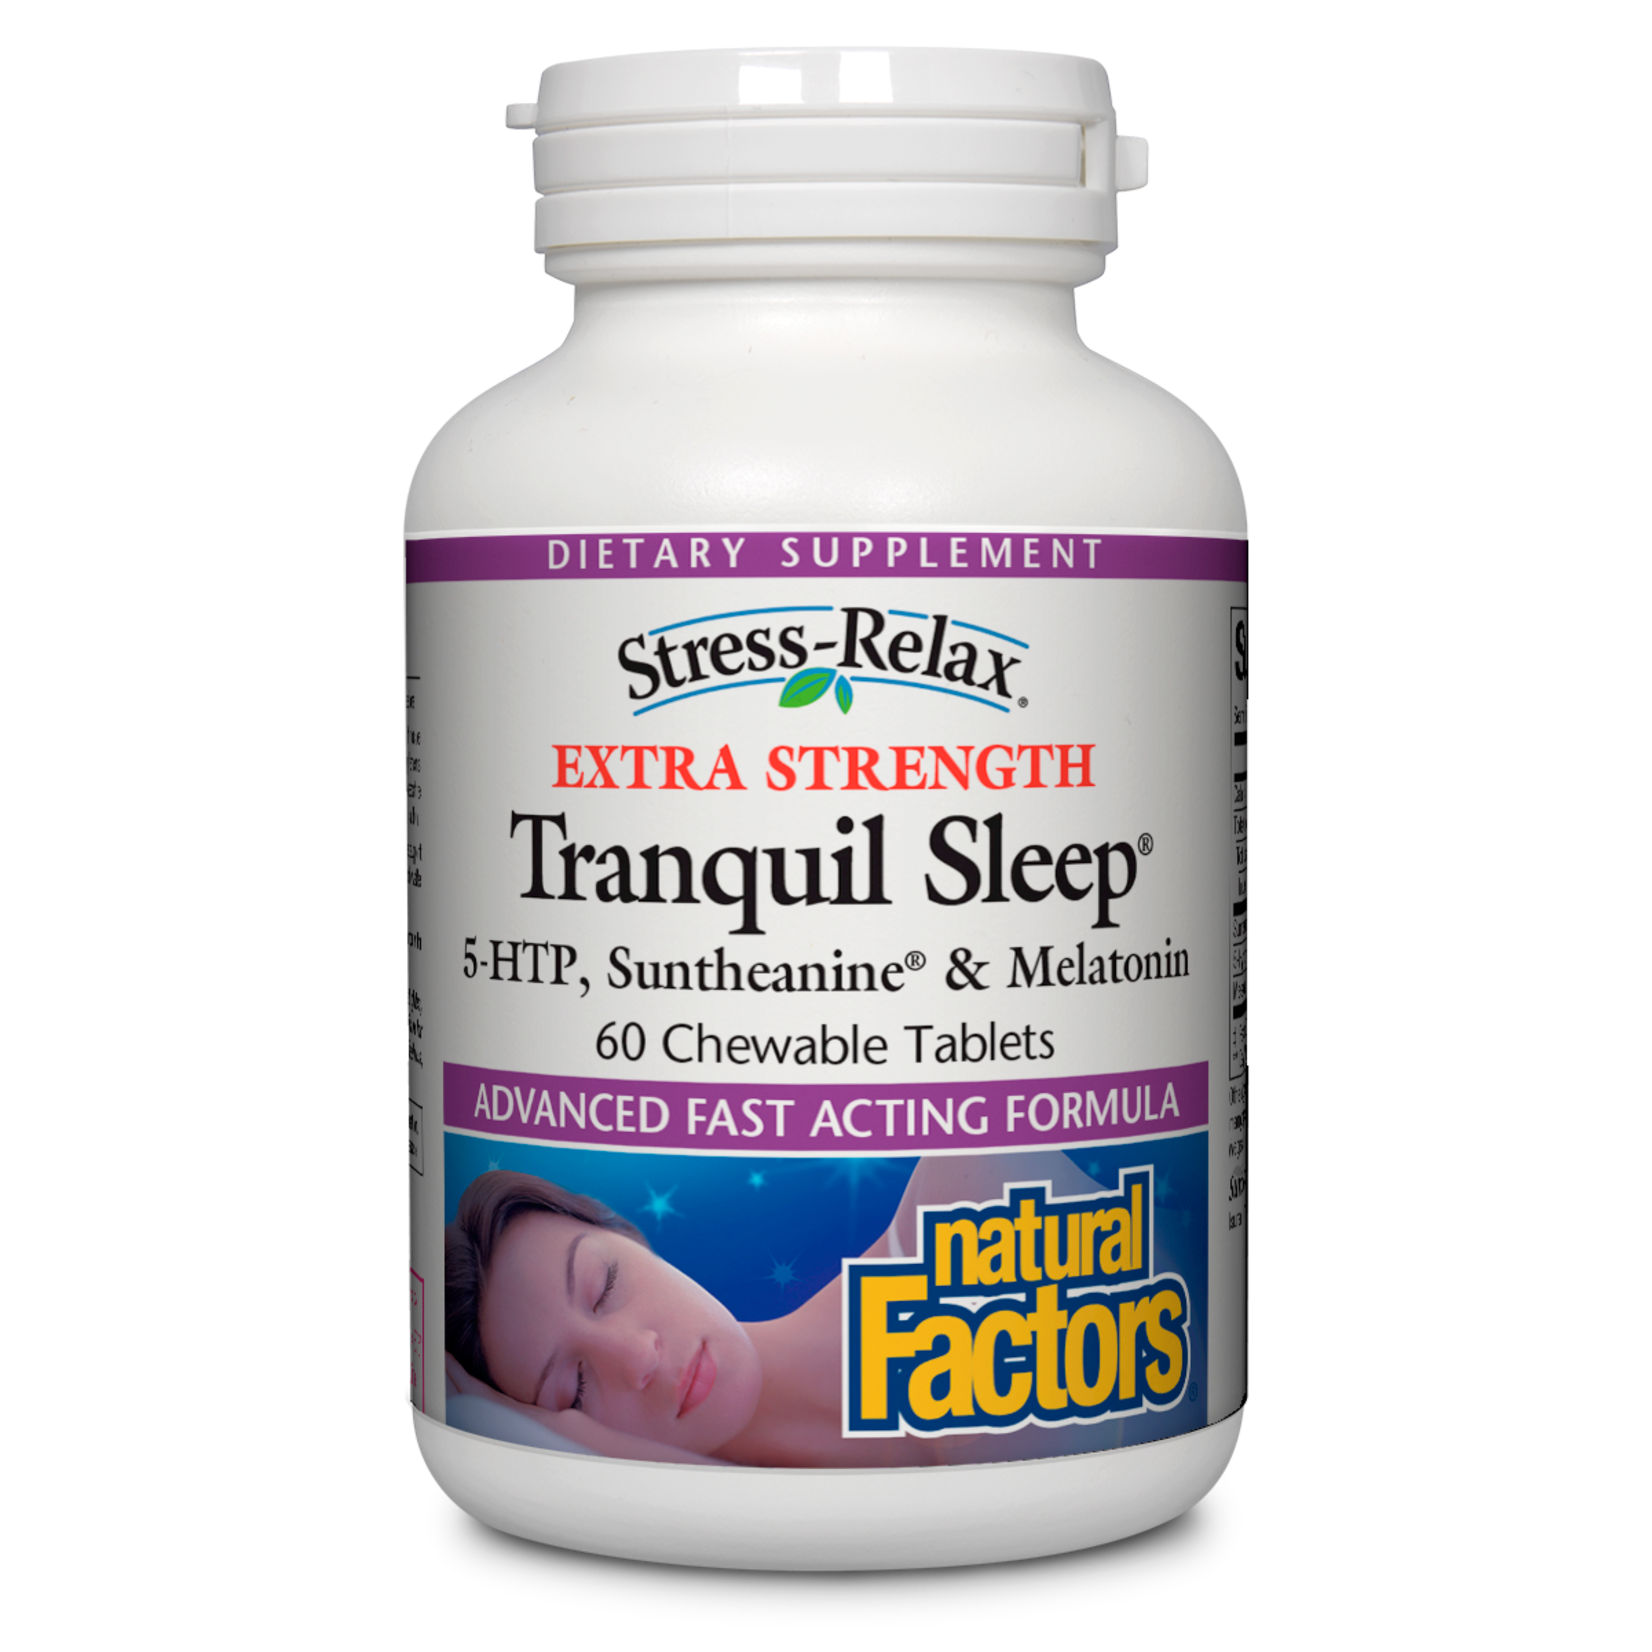 Natural Factors Natural Factors - Stress-Relax Tranquil Sleep Extra Strength - 60 Tablets